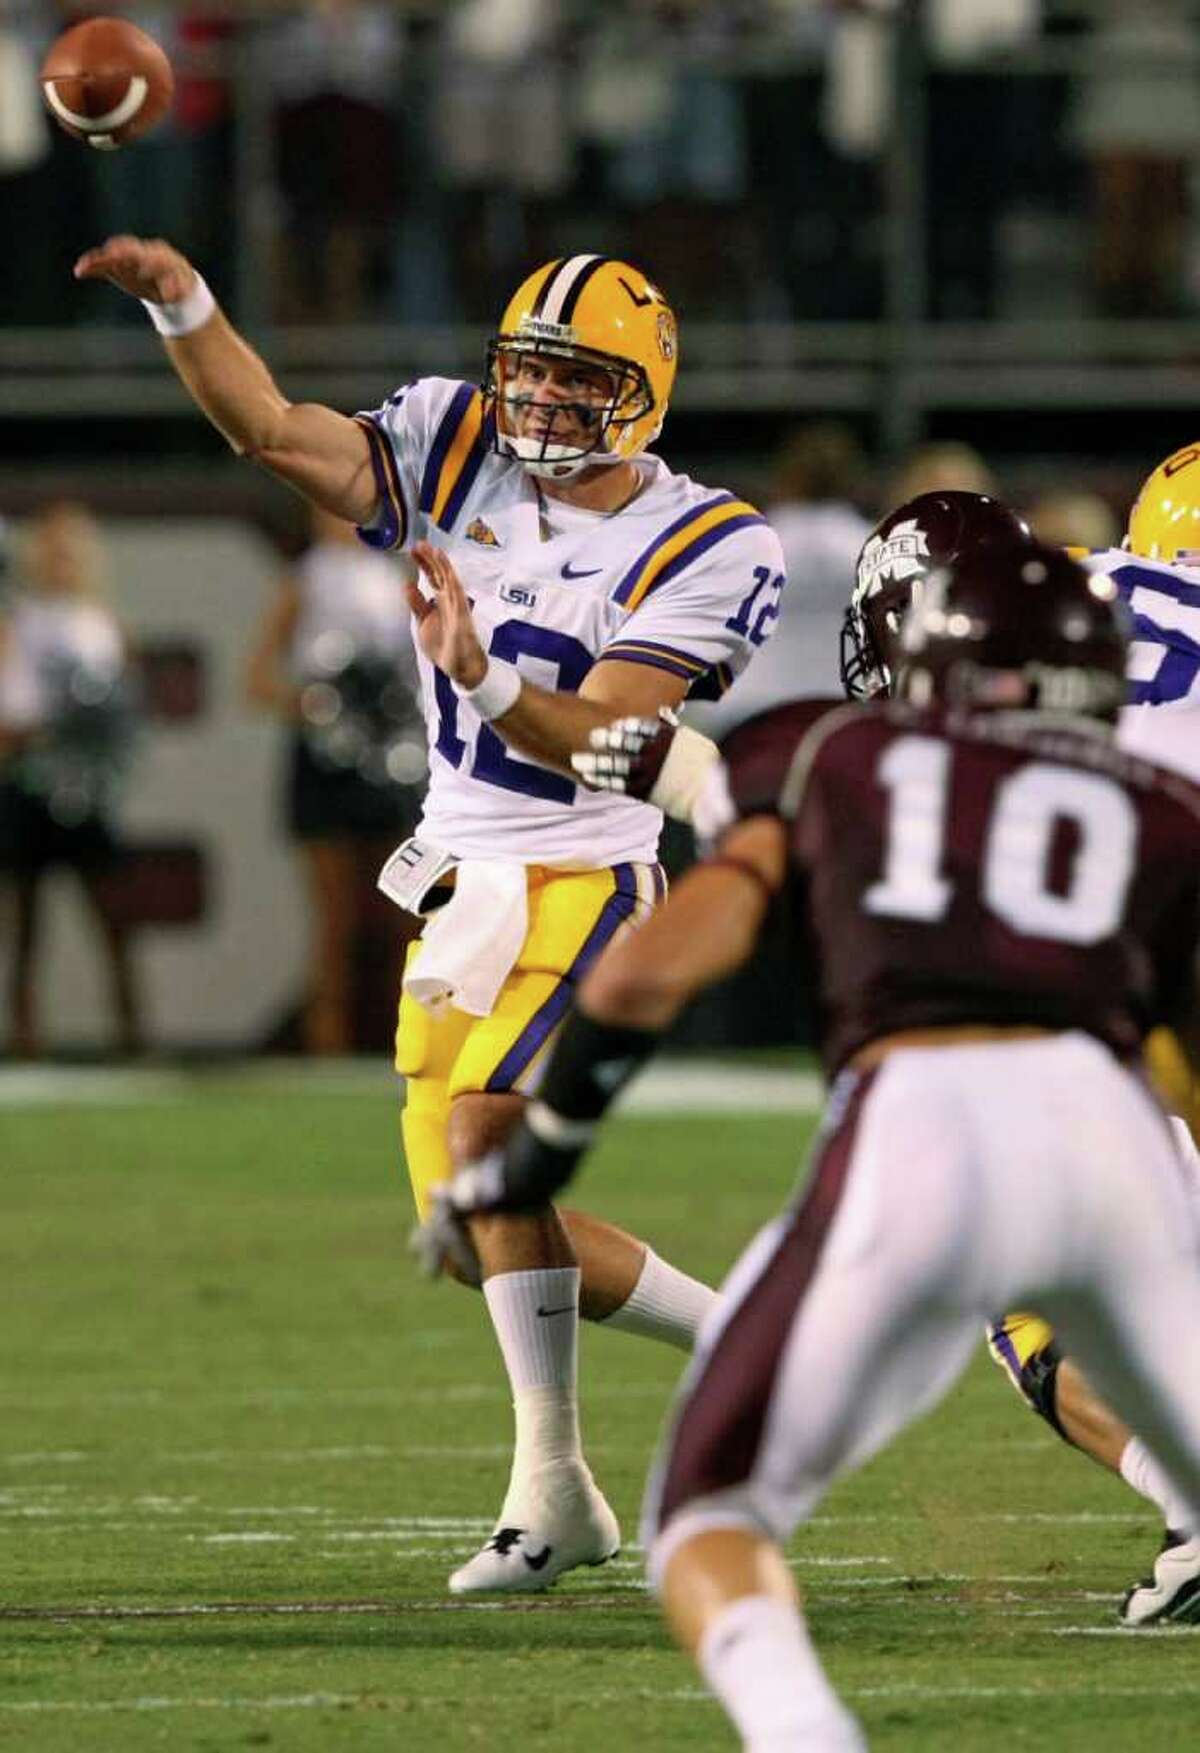 KERRY SMITH: AP ON TARGET: Quarterback Jarrett Lee (12) played a solid game in leading No. 3 LSU to victory Thursday night.